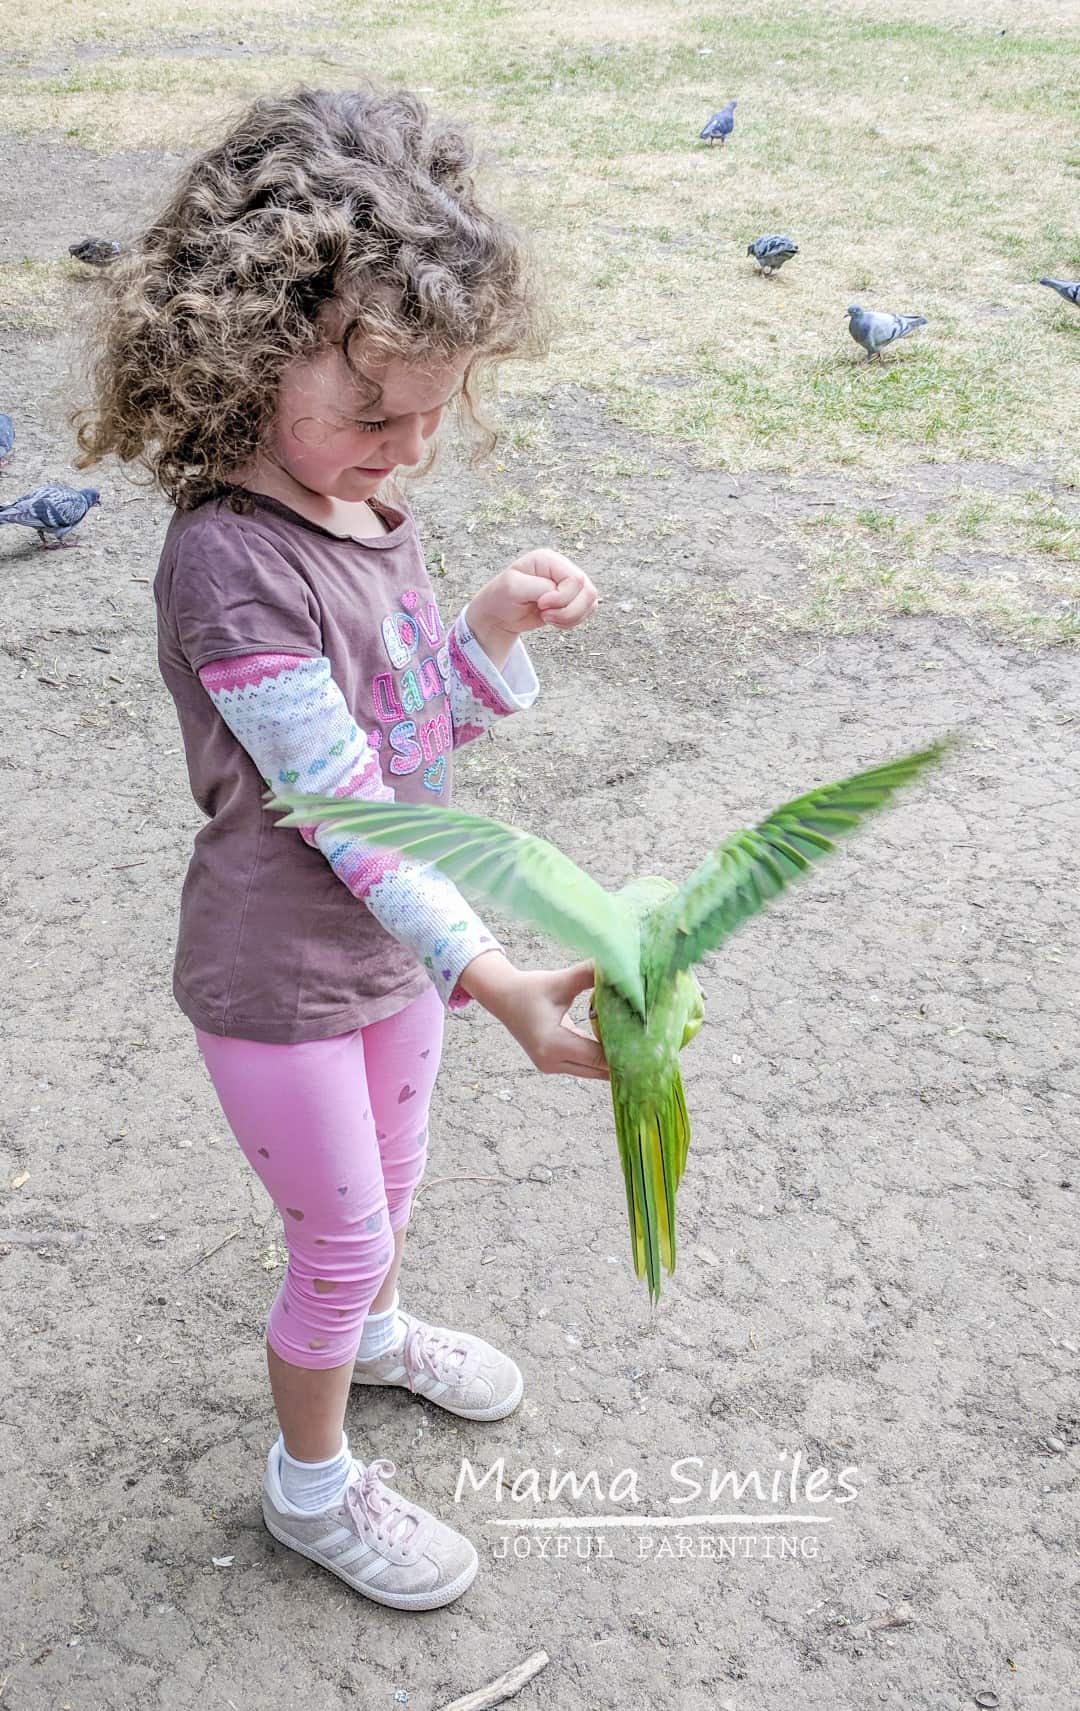 Feeding the parakeets in Hyde Park